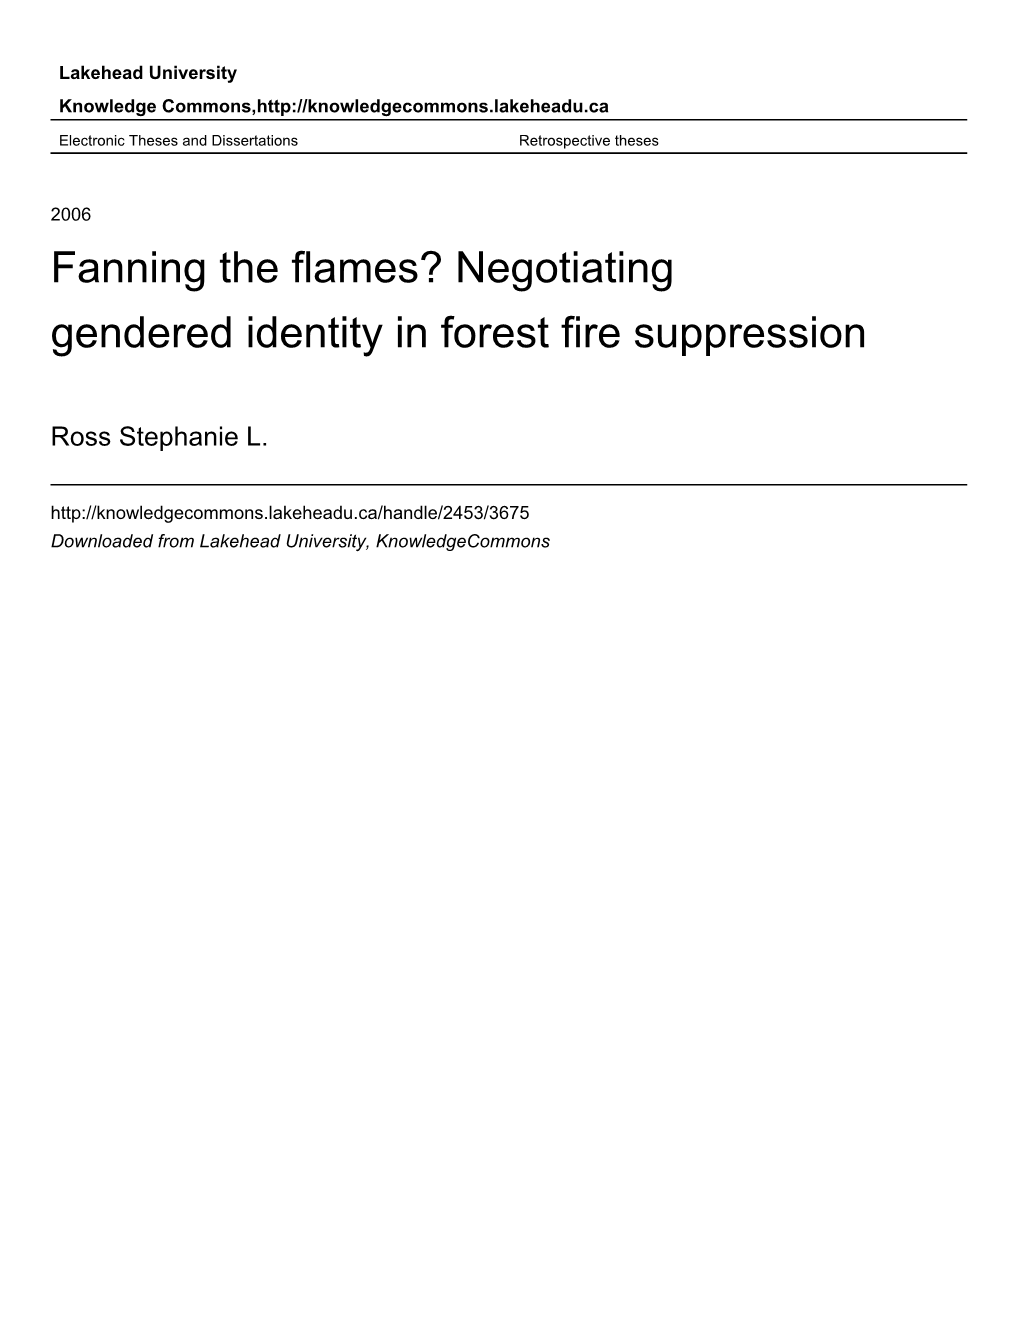 Negotiating Gendered Identity in Forest Fire Suppression